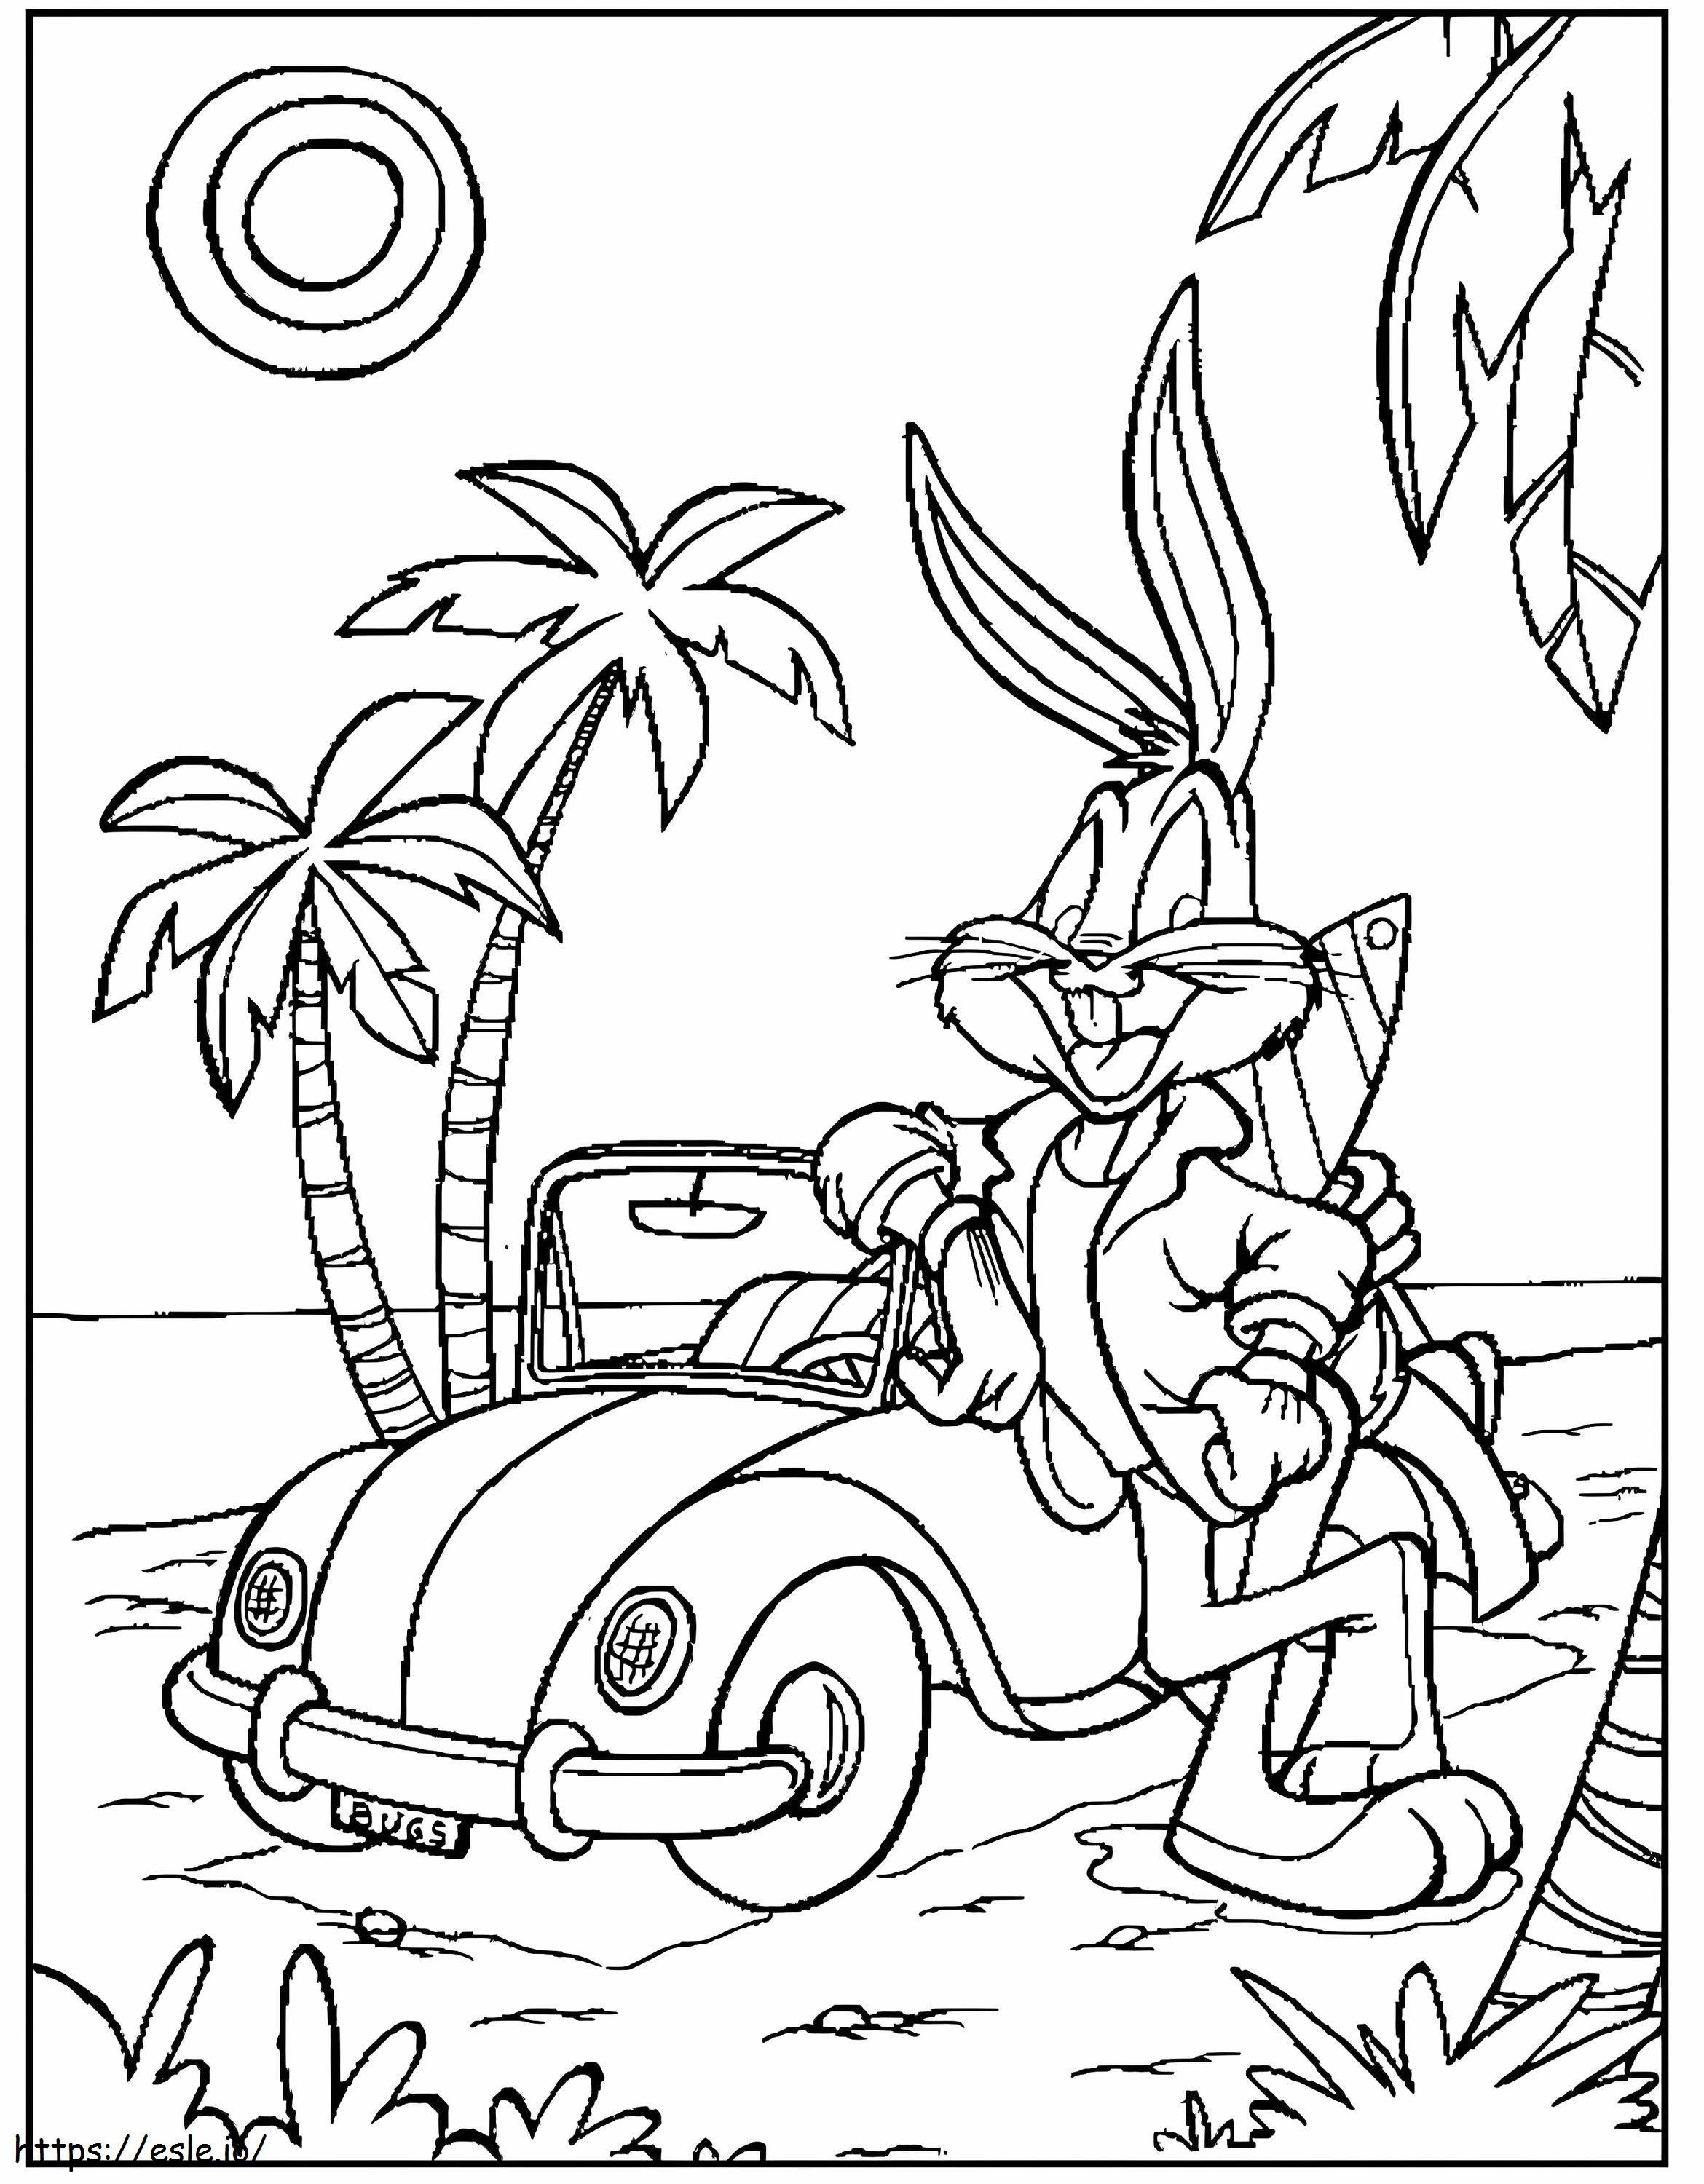 Bugs Bunny With Car On The Beach coloring page